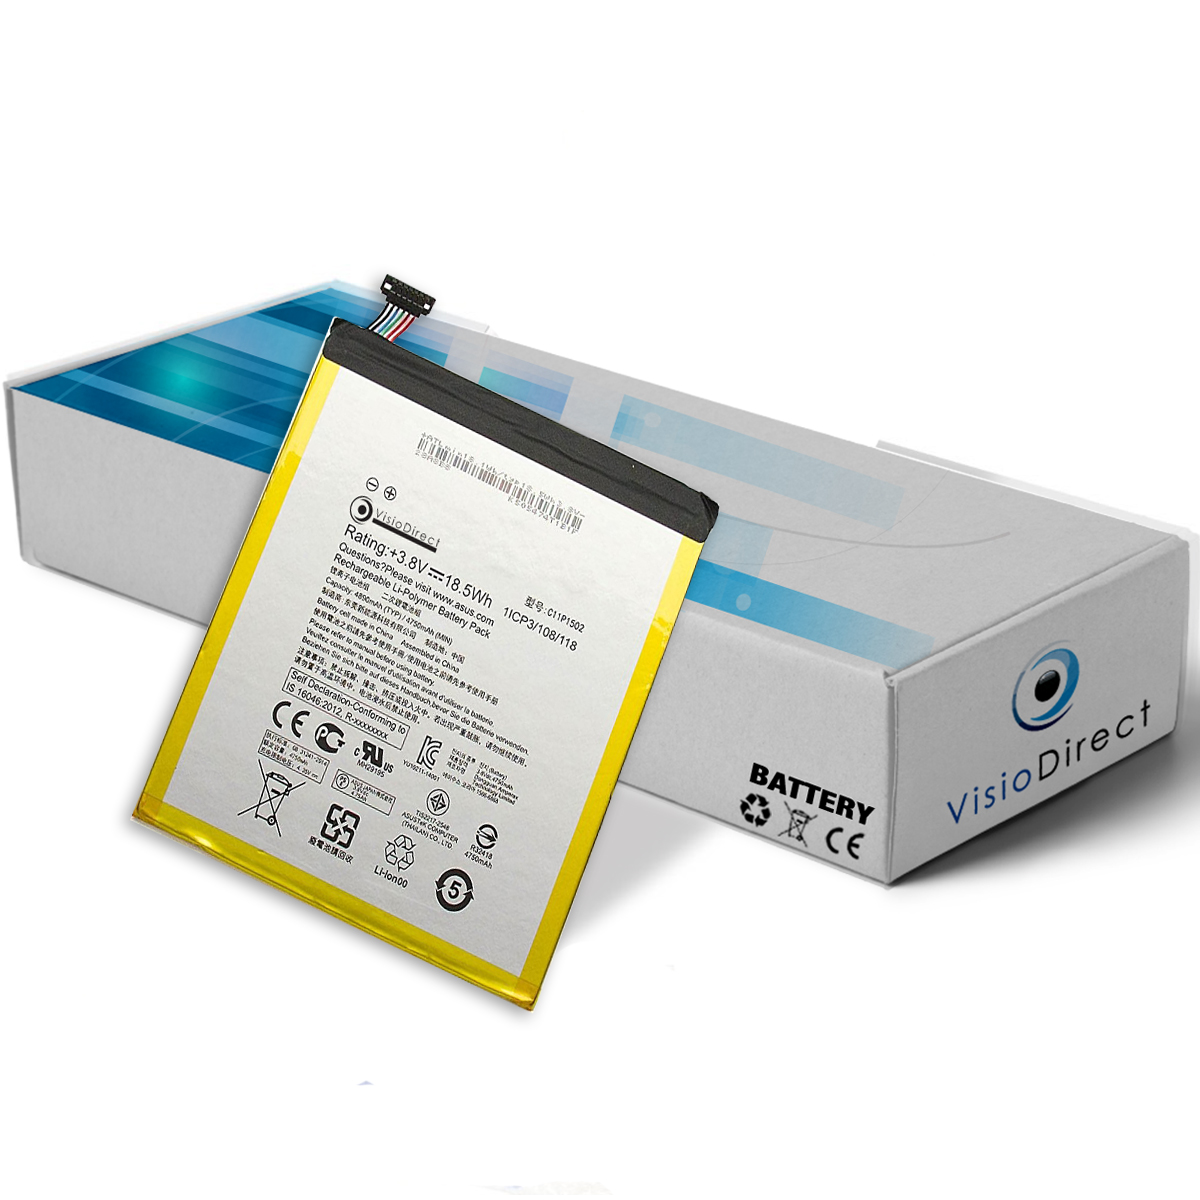 Visiodirect® Batterie pour ta...